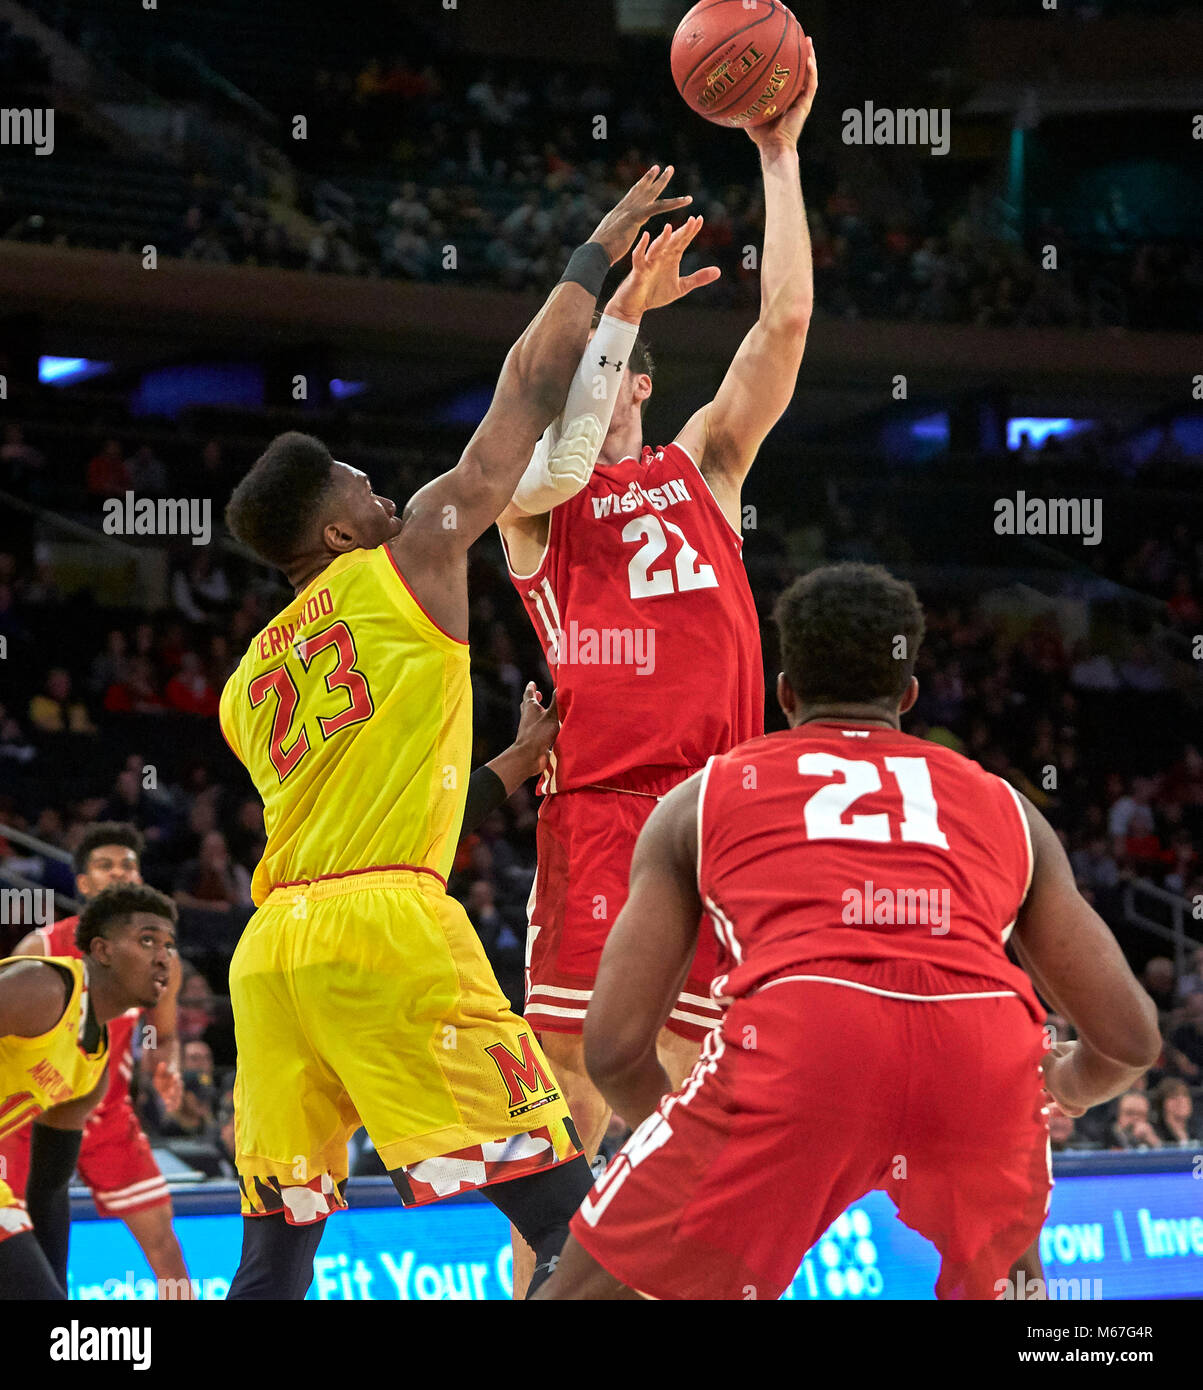 New York, New York, USA. 1st Mar, 2018. Wisconsin Badgers forward Ethan Happ (22) shoots over Maryland Terrapins forward Bruno Fernando (23) in the first half during the second round of Big Ten Conference Tournament play at Madison Square Garden in New York City. Duncan Williams/CSM/Alamy Live News Stock Photo